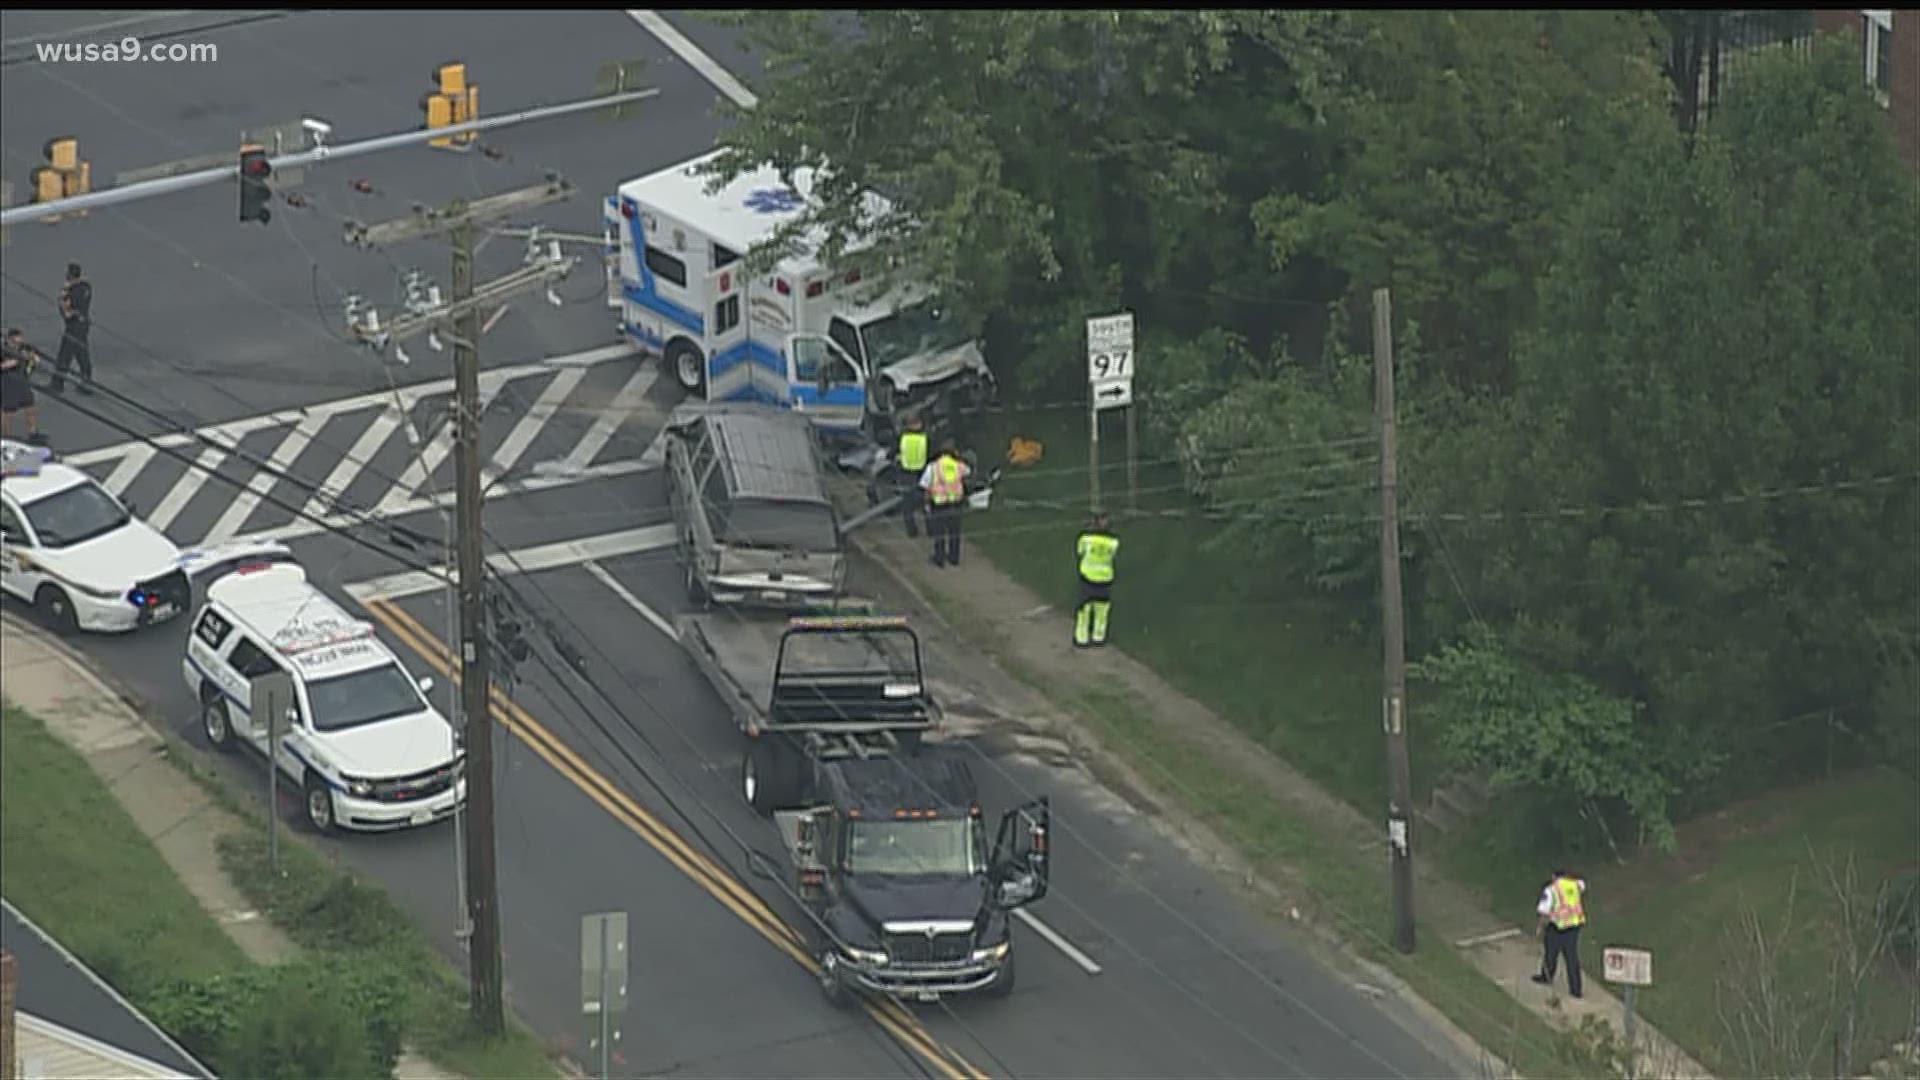 Four vehicles including an ambulance crashed on Georgia Avenue and Arcola Avenue in Wheaton, Maryland. There are multiple people injured.